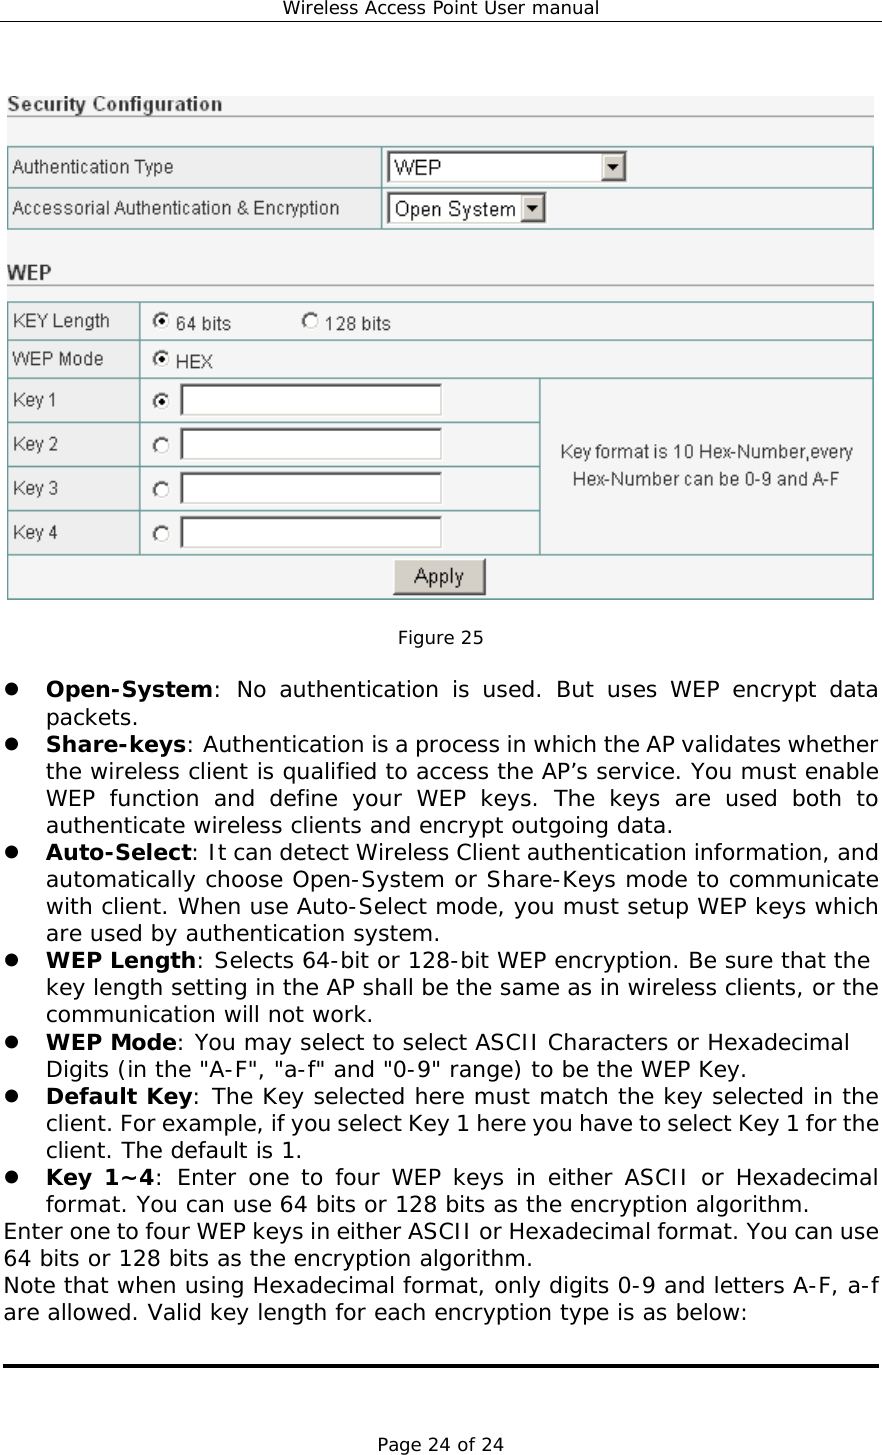 Wireless Access Point User manual Page 24 of 24    Figure 25    Open-System: No authentication is used. But uses WEP encrypt data packets.   Share-keys: Authentication is a process in which the AP validates whether the wireless client is qualified to access the AP’s service. You must enable WEP function and define your WEP keys. The keys are used both to authenticate wireless clients and encrypt outgoing data.   Auto-Select: It can detect Wireless Client authentication information, and automatically choose Open-System or Share-Keys mode to communicate with client. When use Auto-Select mode, you must setup WEP keys which are used by authentication system.   WEP Length: Selects 64-bit or 128-bit WEP encryption. Be sure that the key length setting in the AP shall be the same as in wireless clients, or the communication will not work.   WEP Mode: You may select to select ASCII Characters or Hexadecimal Digits (in the &quot;A-F&quot;, &quot;a-f&quot; and &quot;0-9&quot; range) to be the WEP Key.   Default Key: The Key selected here must match the key selected in the client. For example, if you select Key 1 here you have to select Key 1 for the client. The default is 1.    Key 1~4: Enter one to four WEP keys in either ASCII or Hexadecimal format. You can use 64 bits or 128 bits as the encryption algorithm.  Enter one to four WEP keys in either ASCII or Hexadecimal format. You can use 64 bits or 128 bits as the encryption algorithm. Note that when using Hexadecimal format, only digits 0-9 and letters A-F, a-f are allowed. Valid key length for each encryption type is as below:   